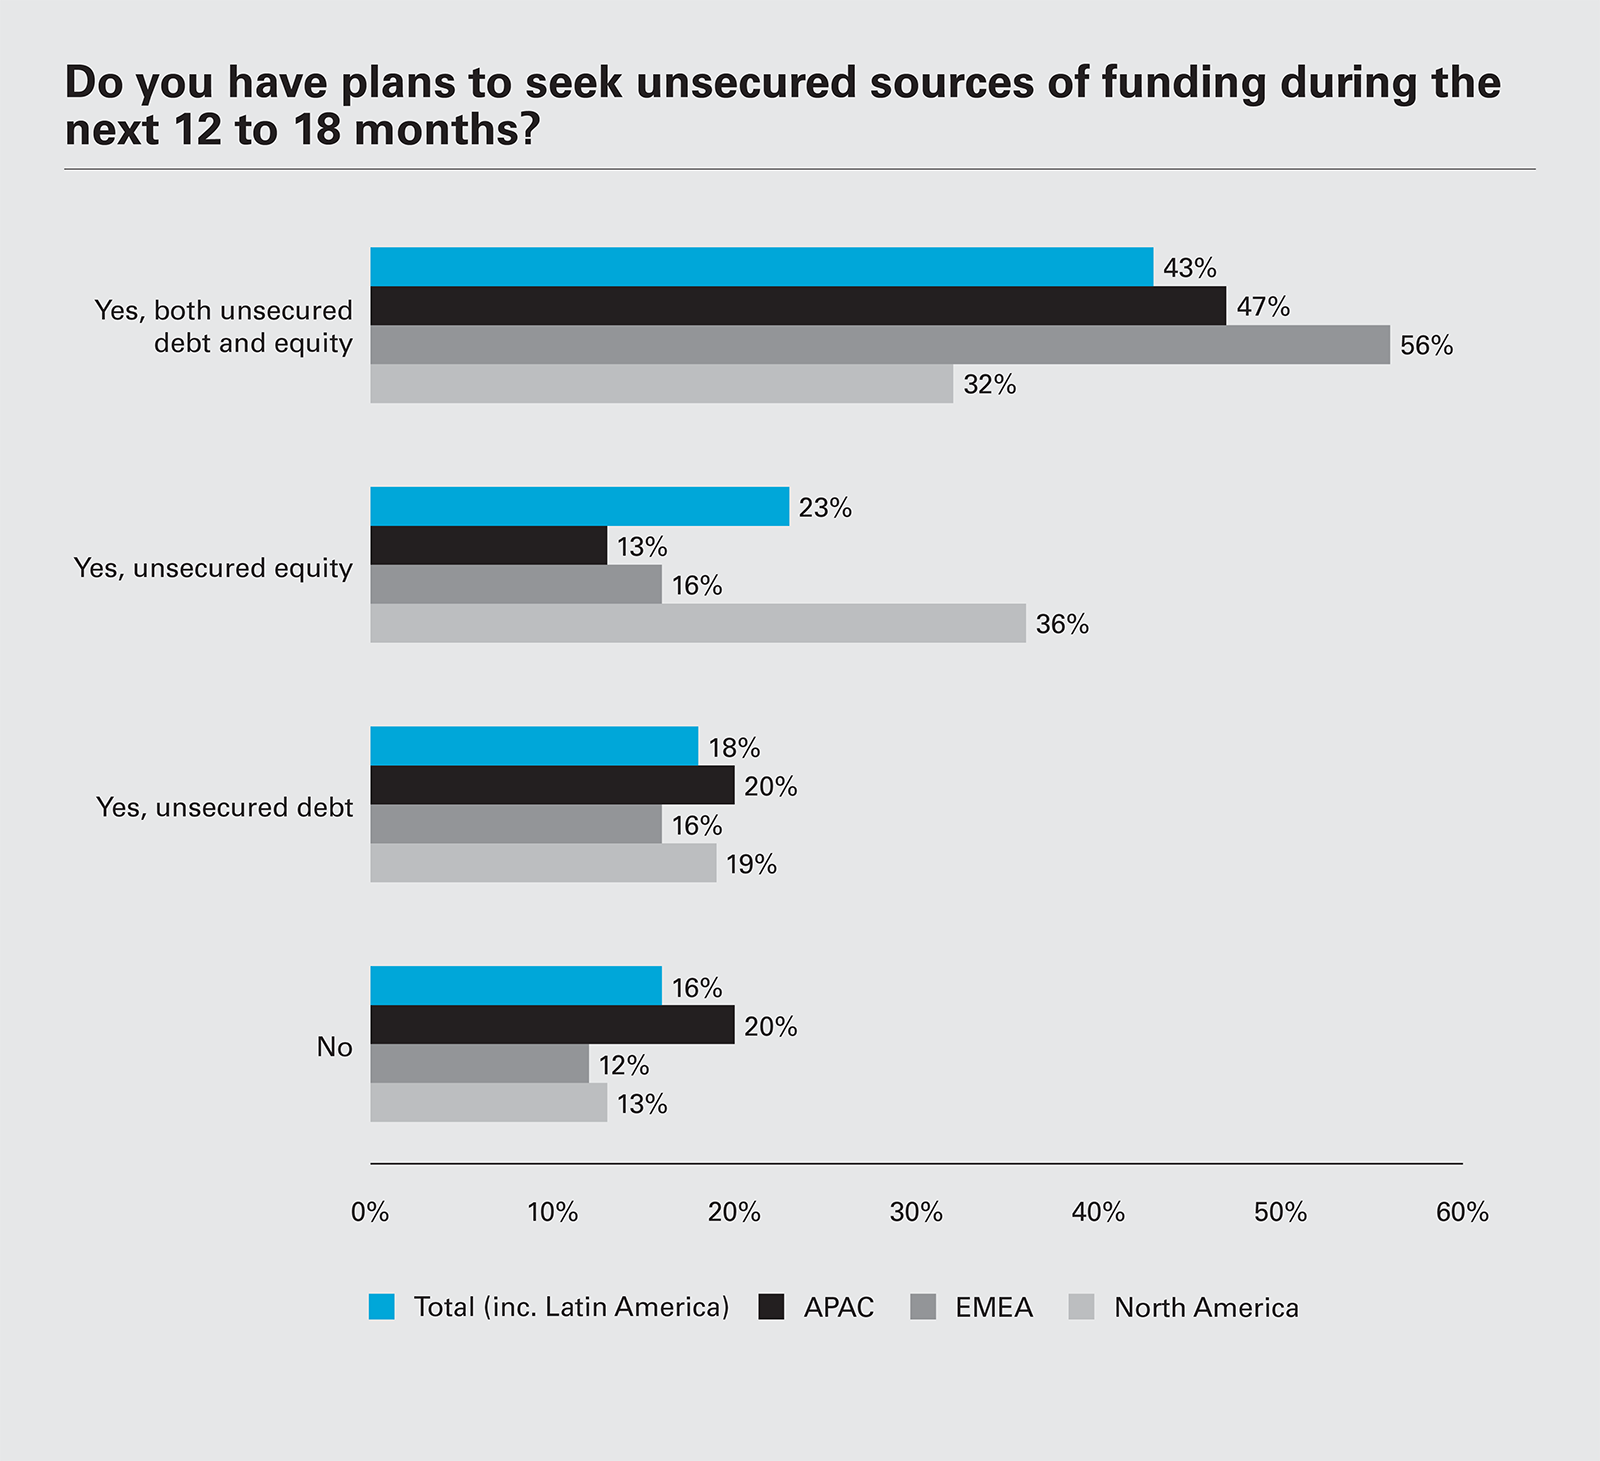 Do you have plans to seek unsecured sources of funding during the next 12 to 18 months?